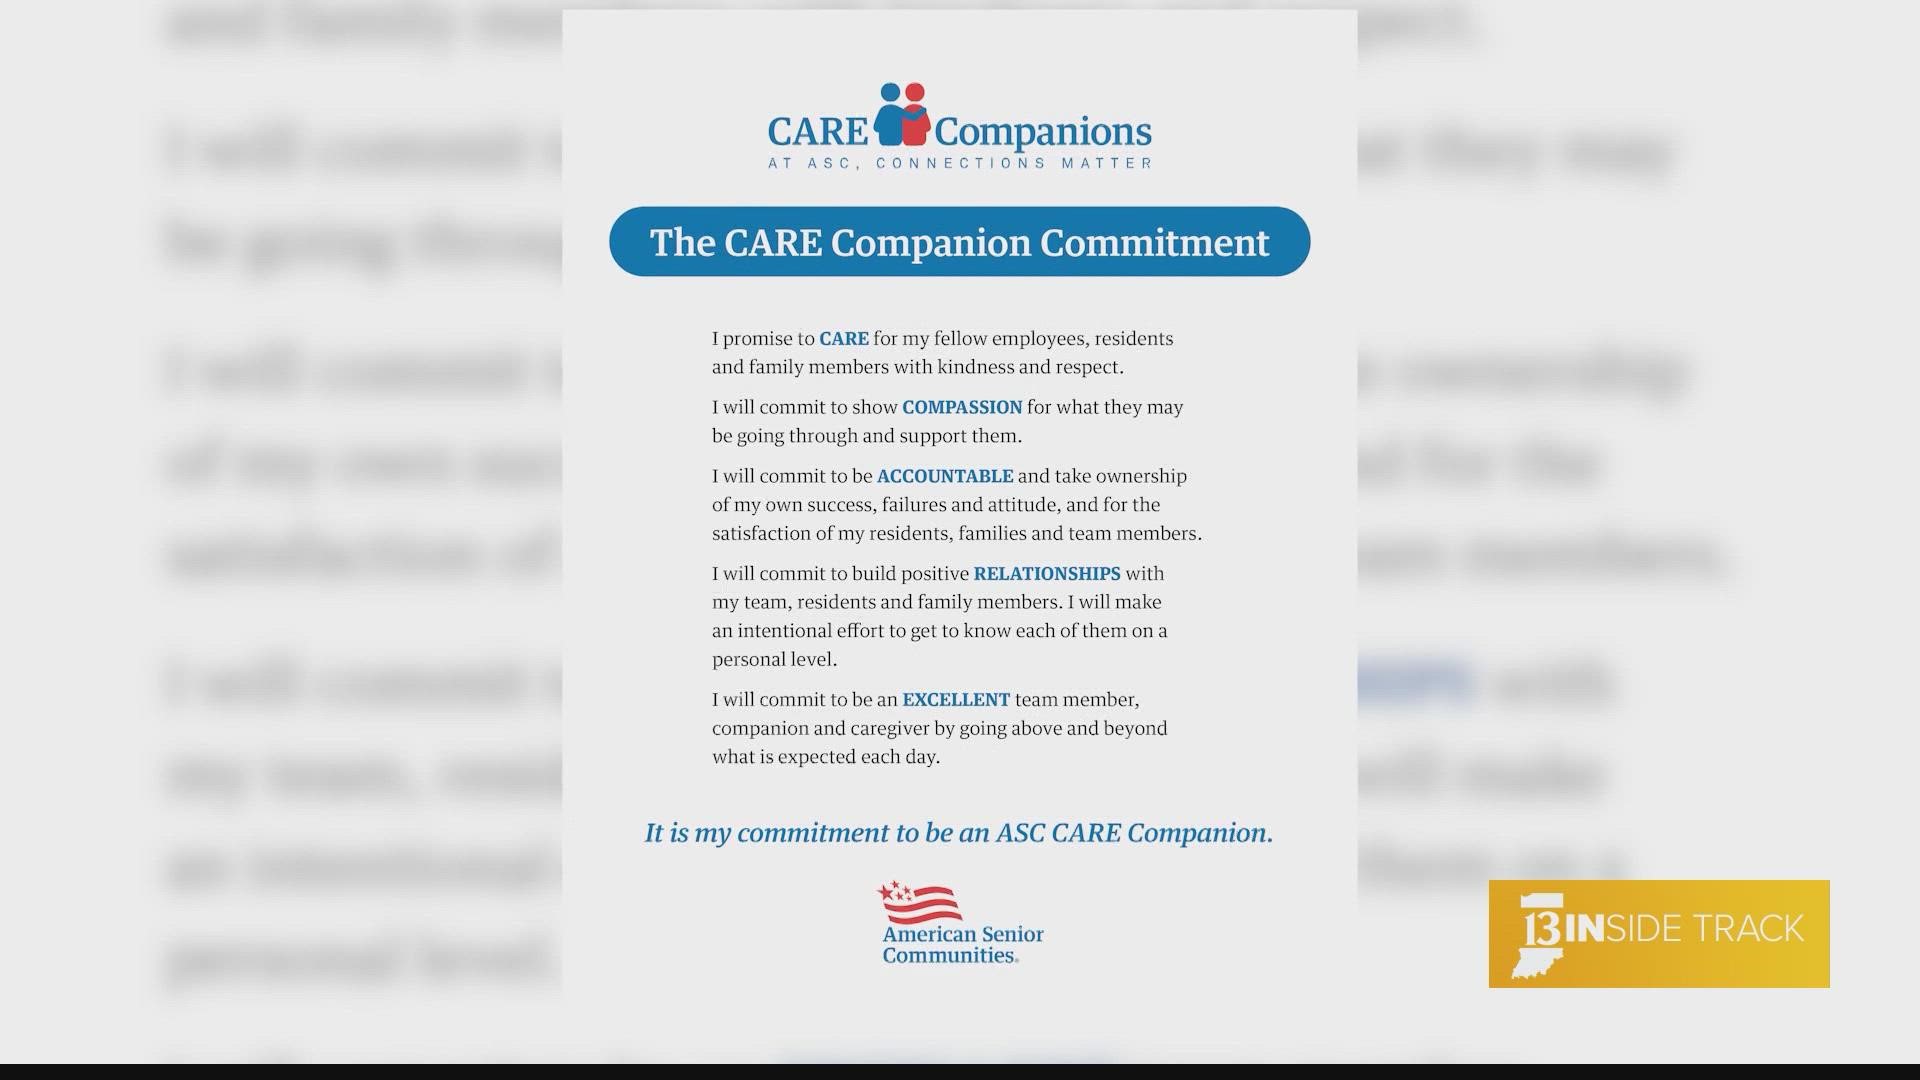 ASC's CARE Companion pledge is rooted in 5 values: care, compassion, accountability, relationships, and excellence.